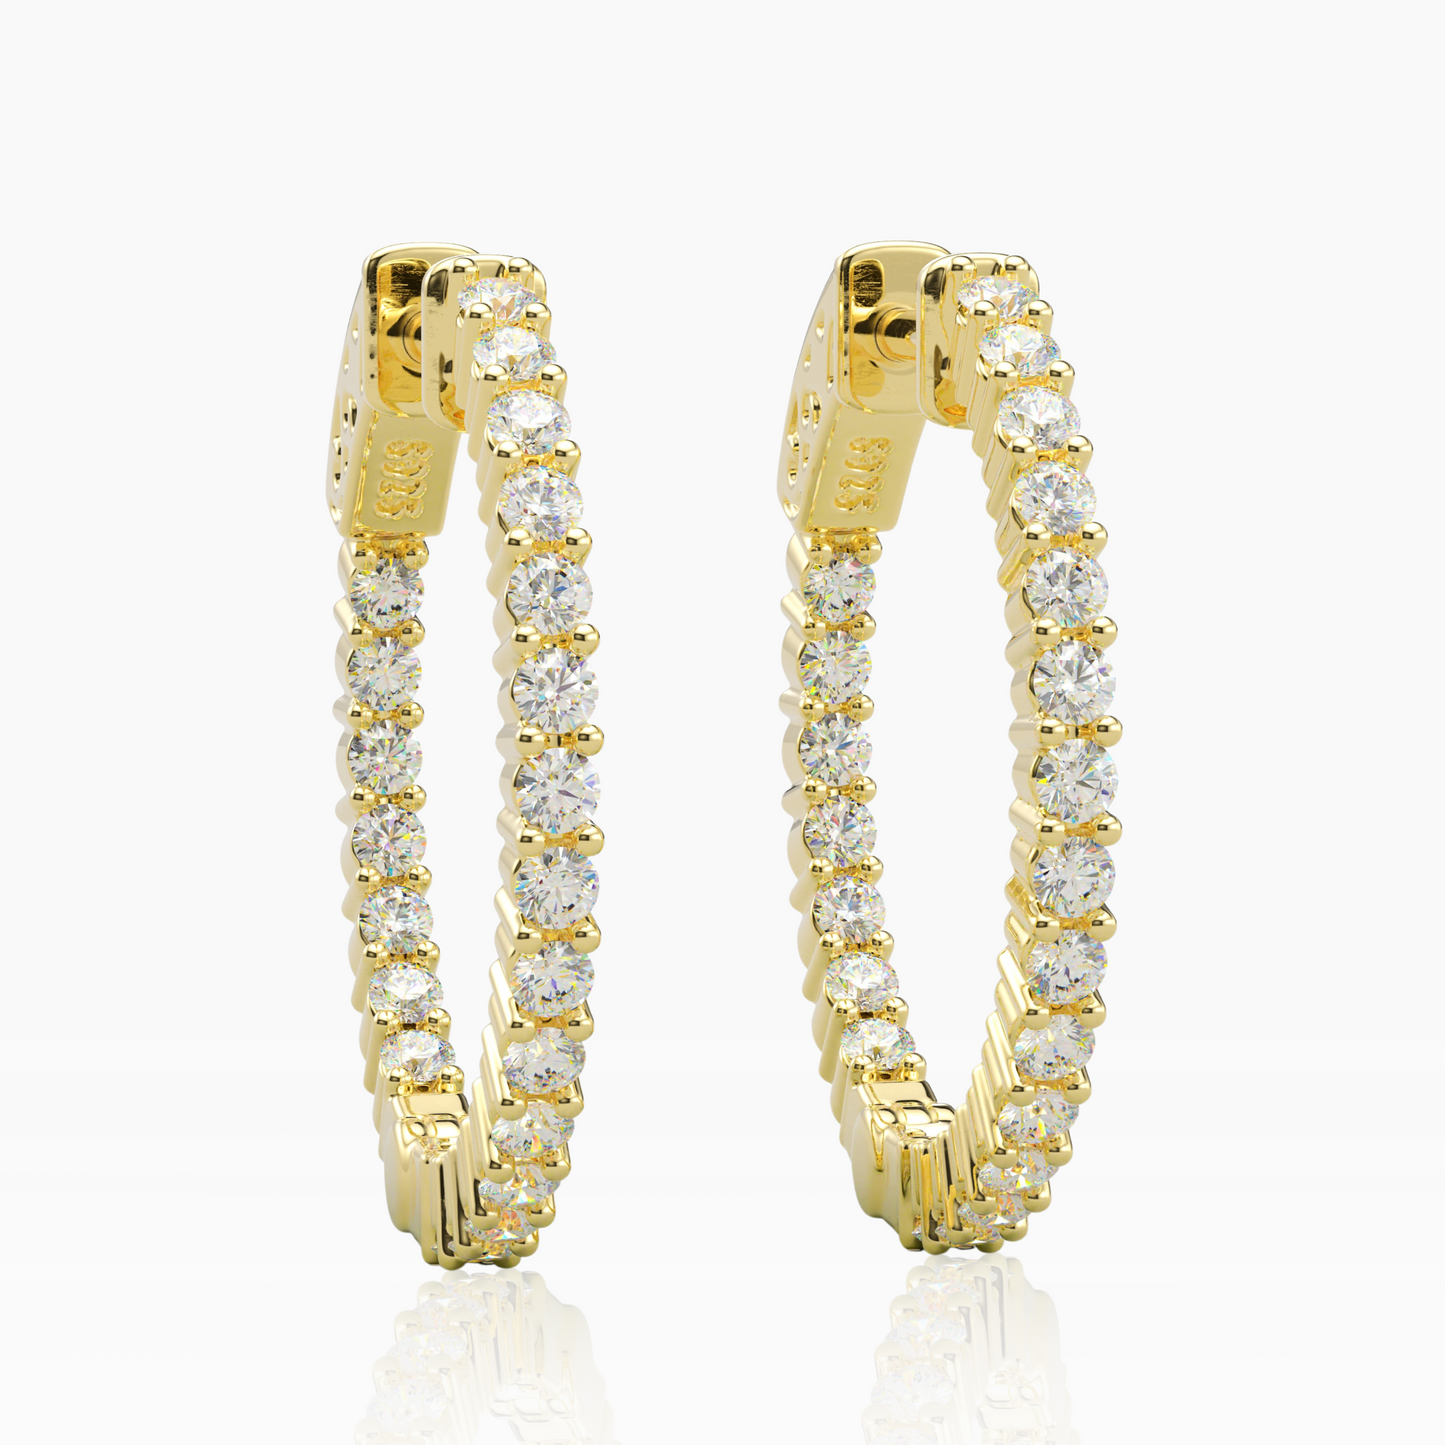 Inside-Outside Pave Round 20mm Small Hoop Earrings | 1.5mm